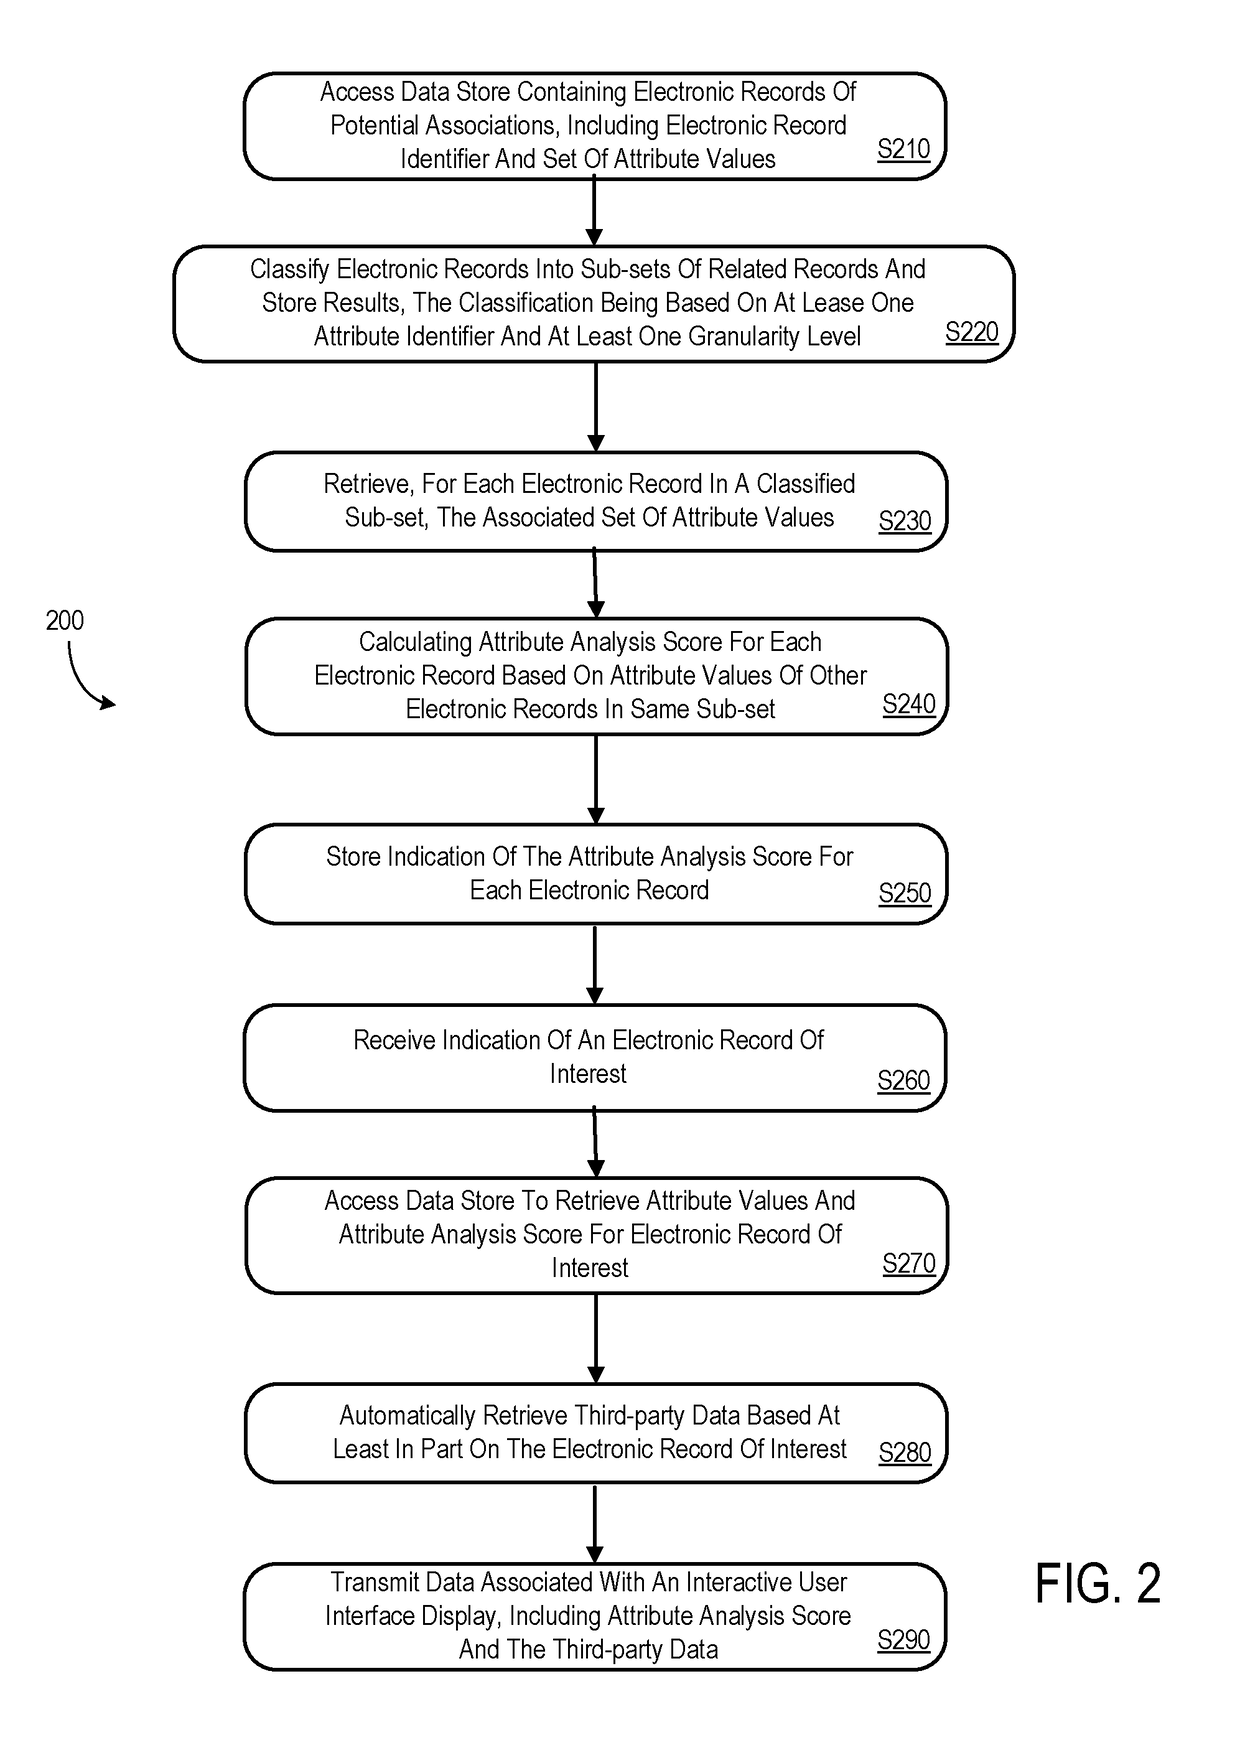 Processing system to generate attribute analysis scores for electronic records